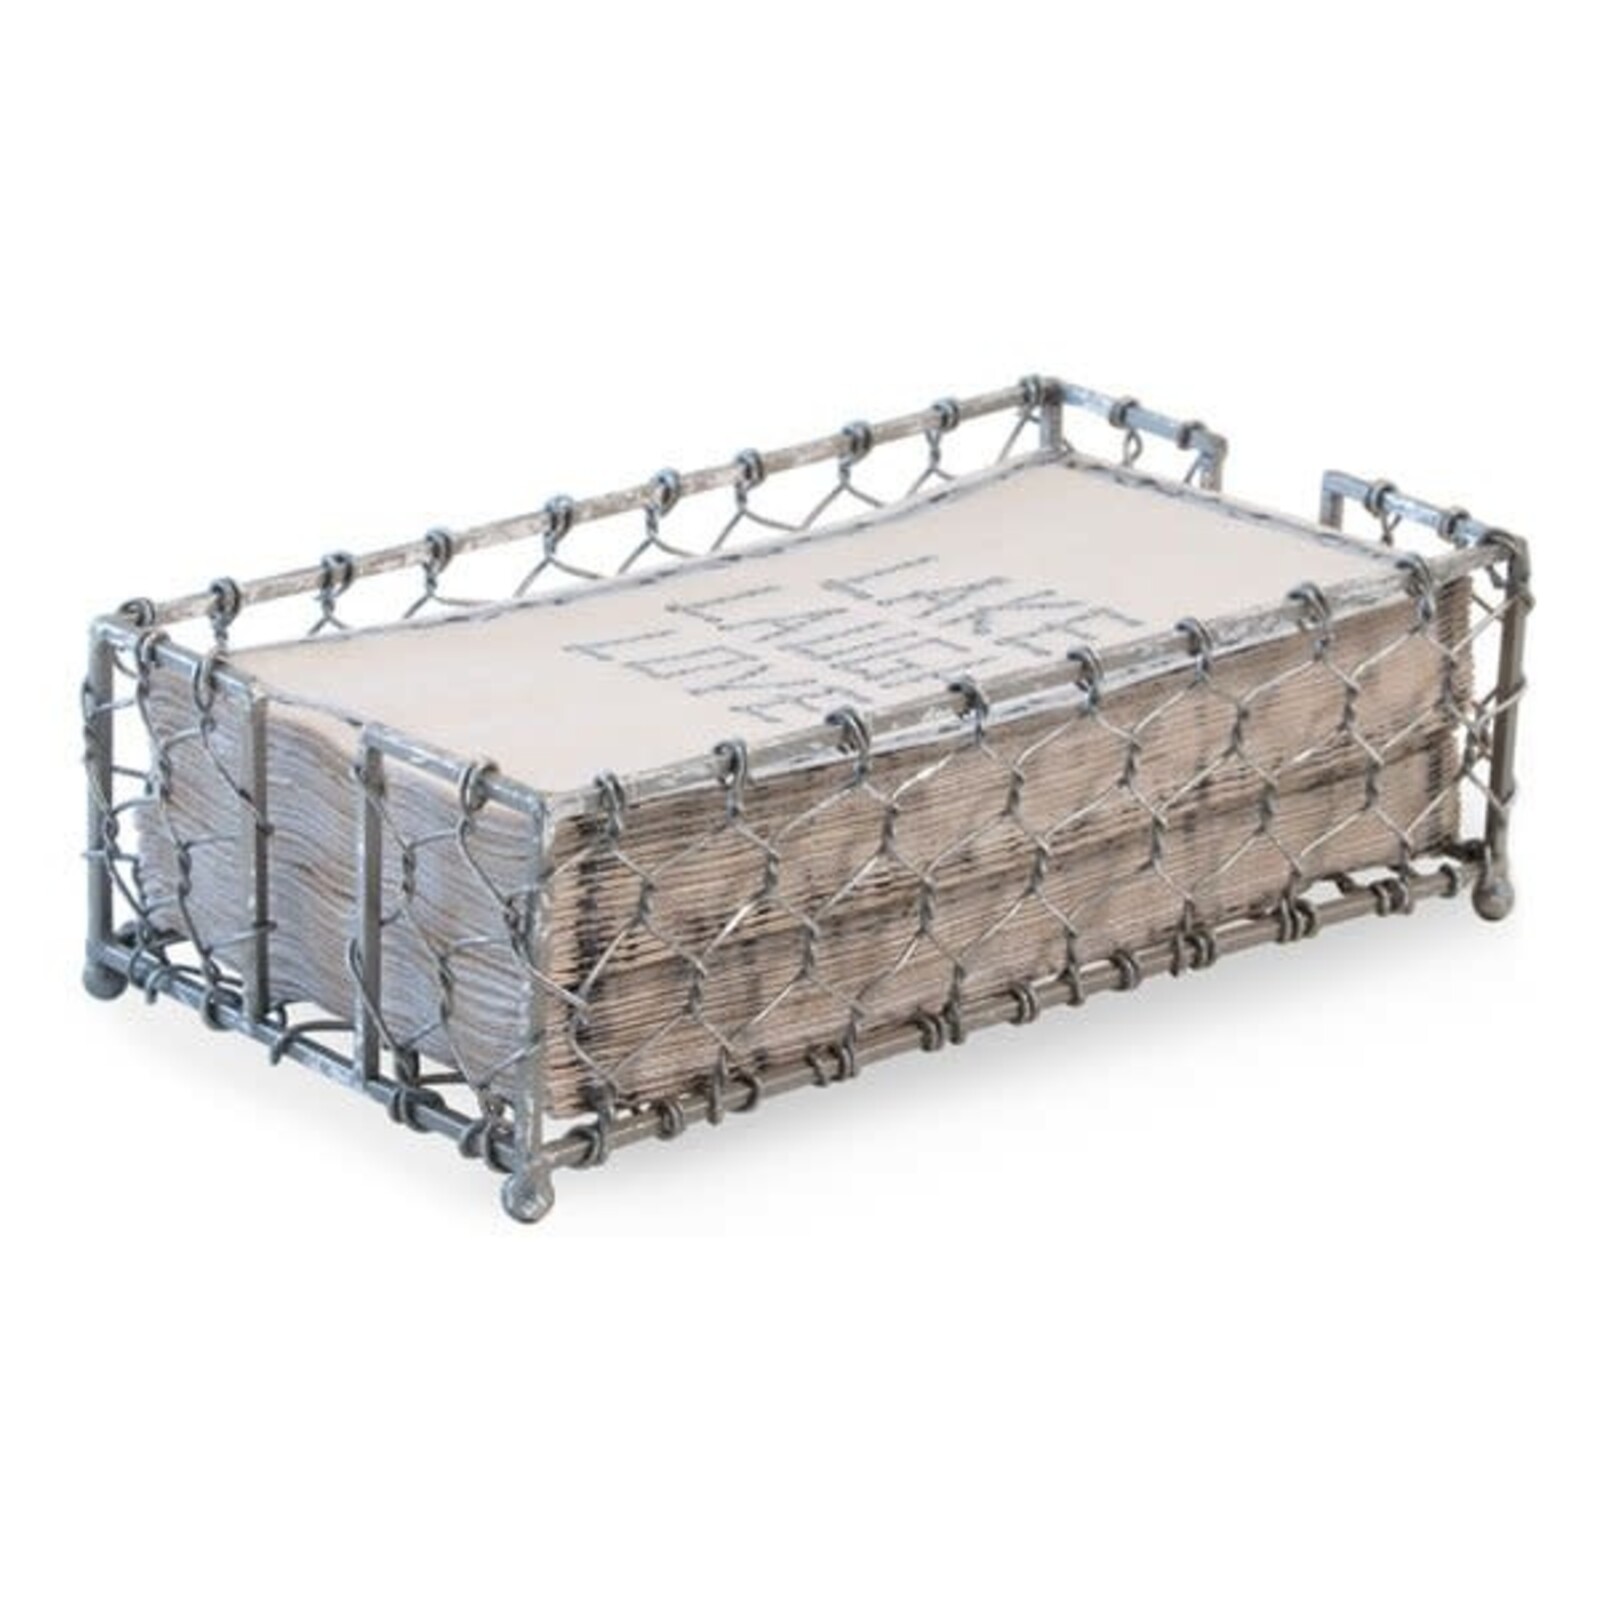 Chicken Wire Guest Towel Silver Foil Caddy loading=